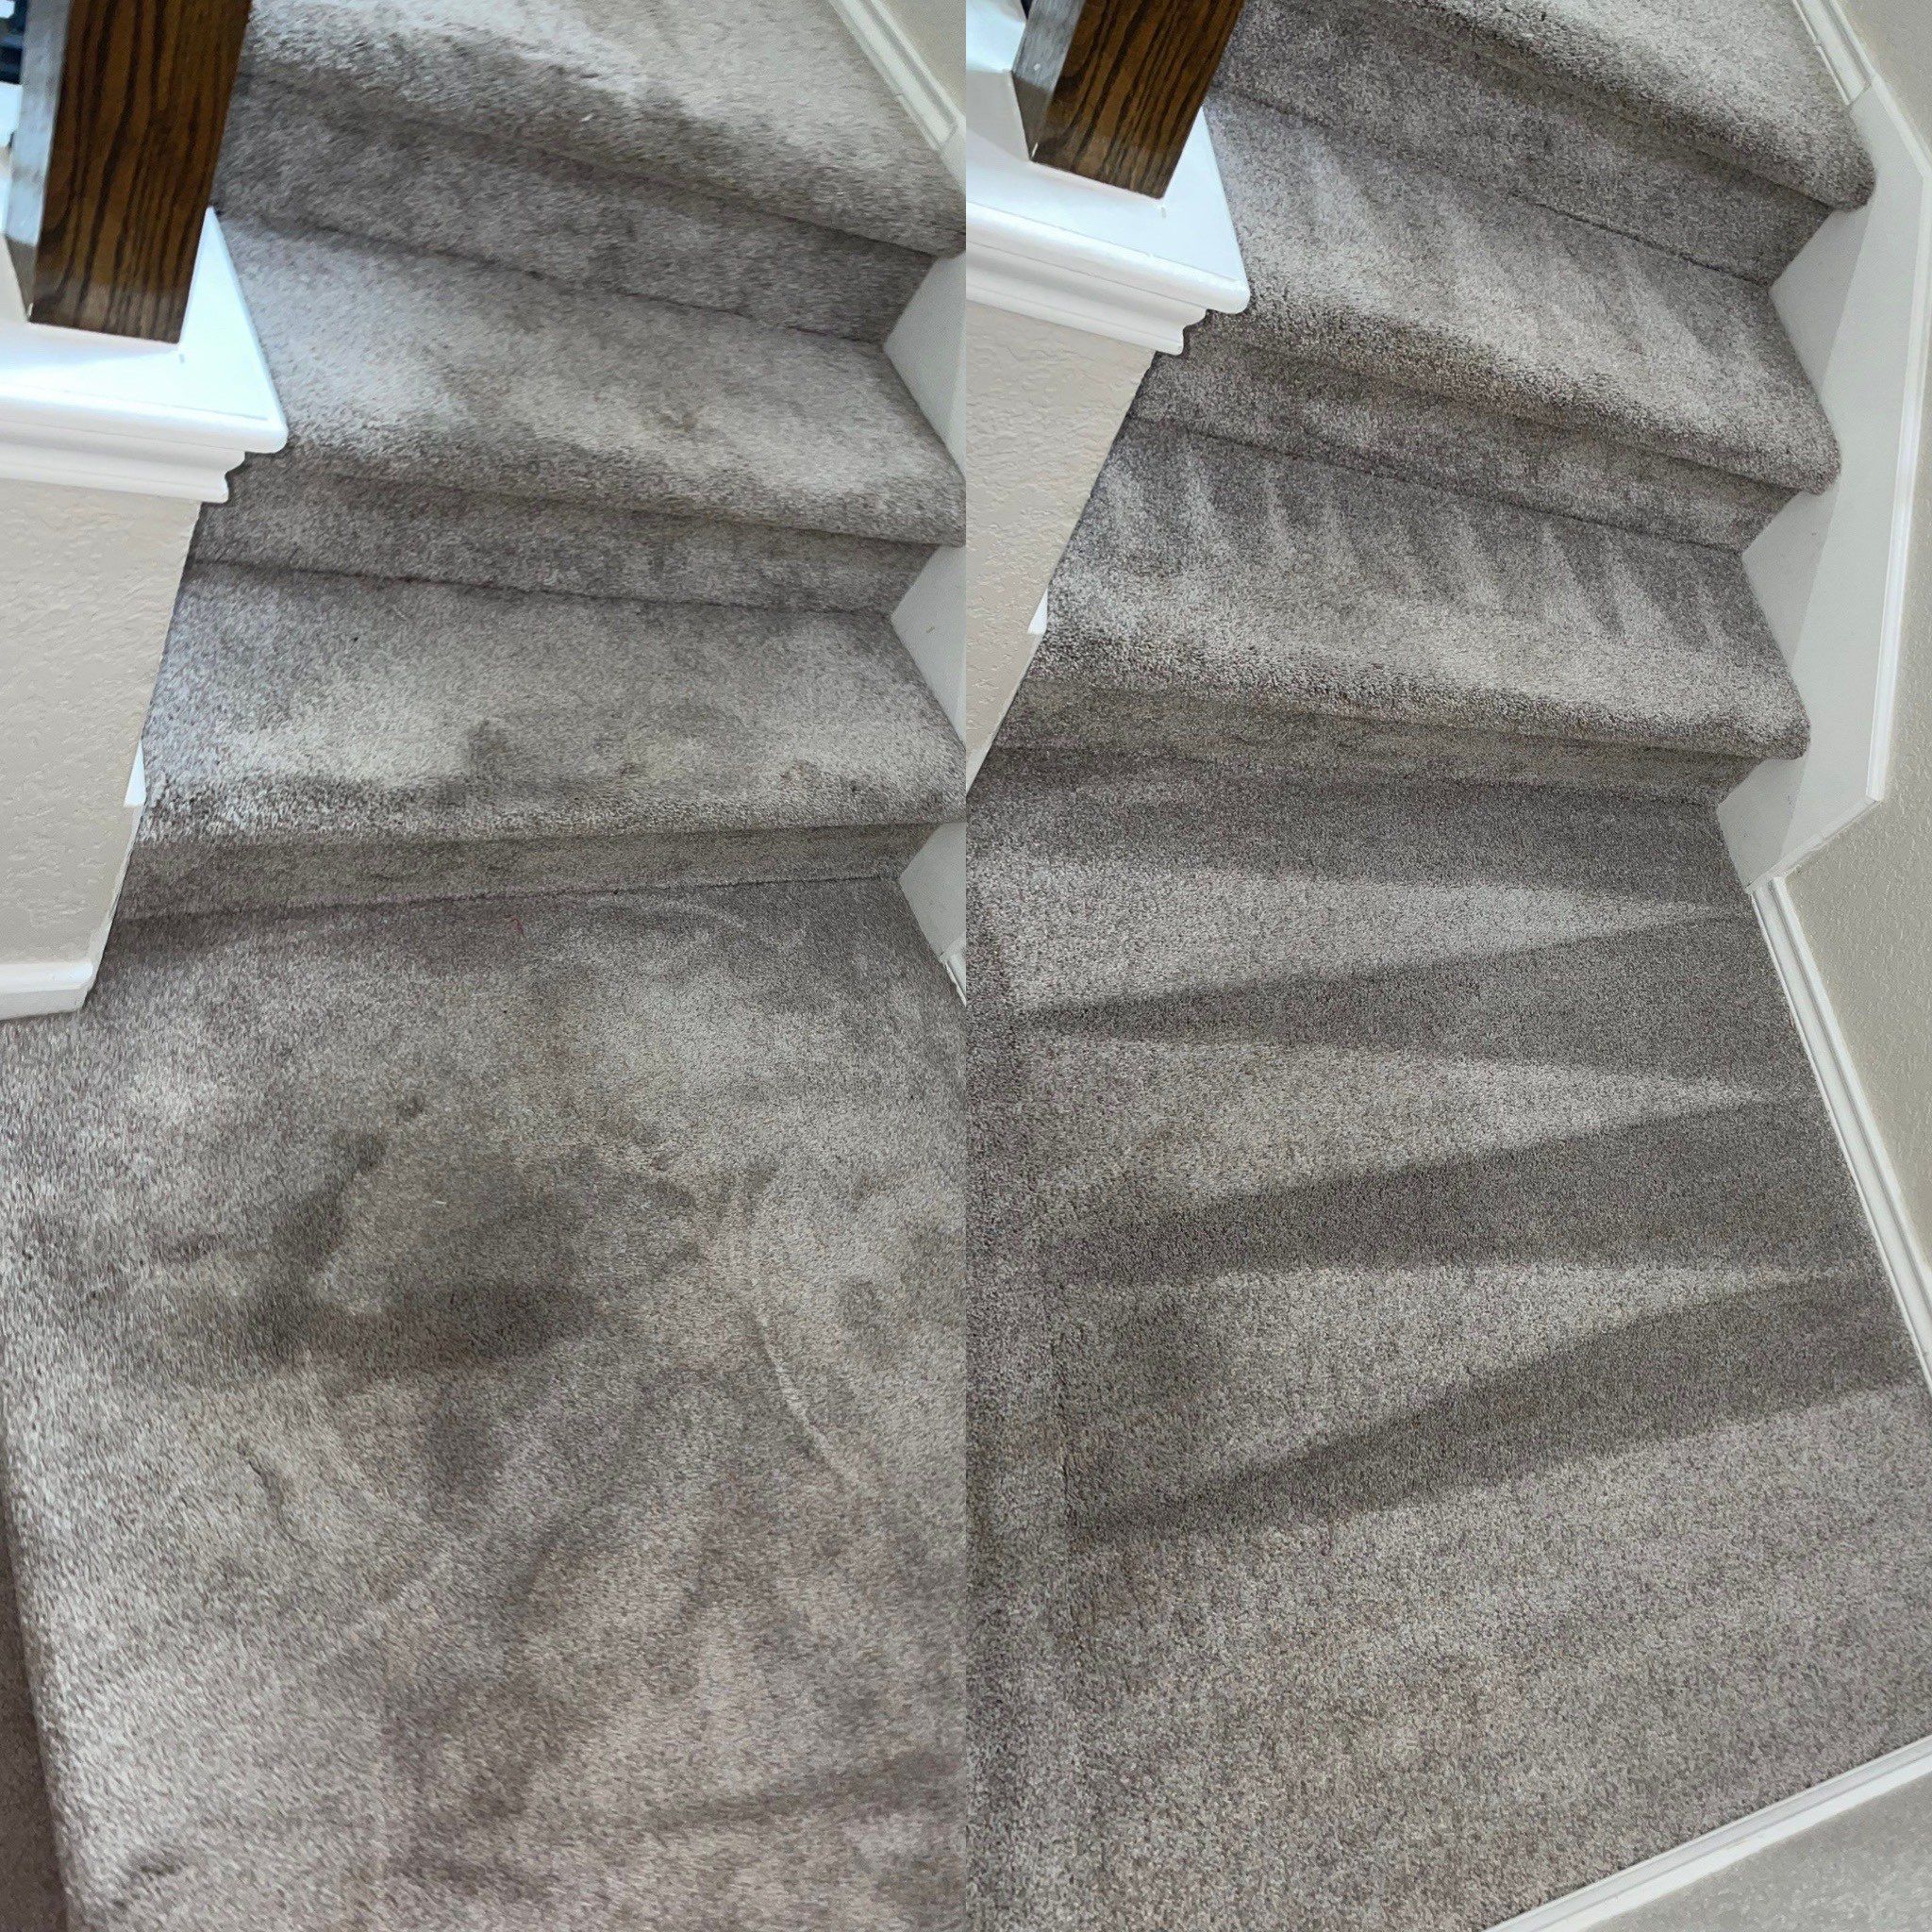 carpet cleaning of dirty stairs before and after comparison showing significant stain removal